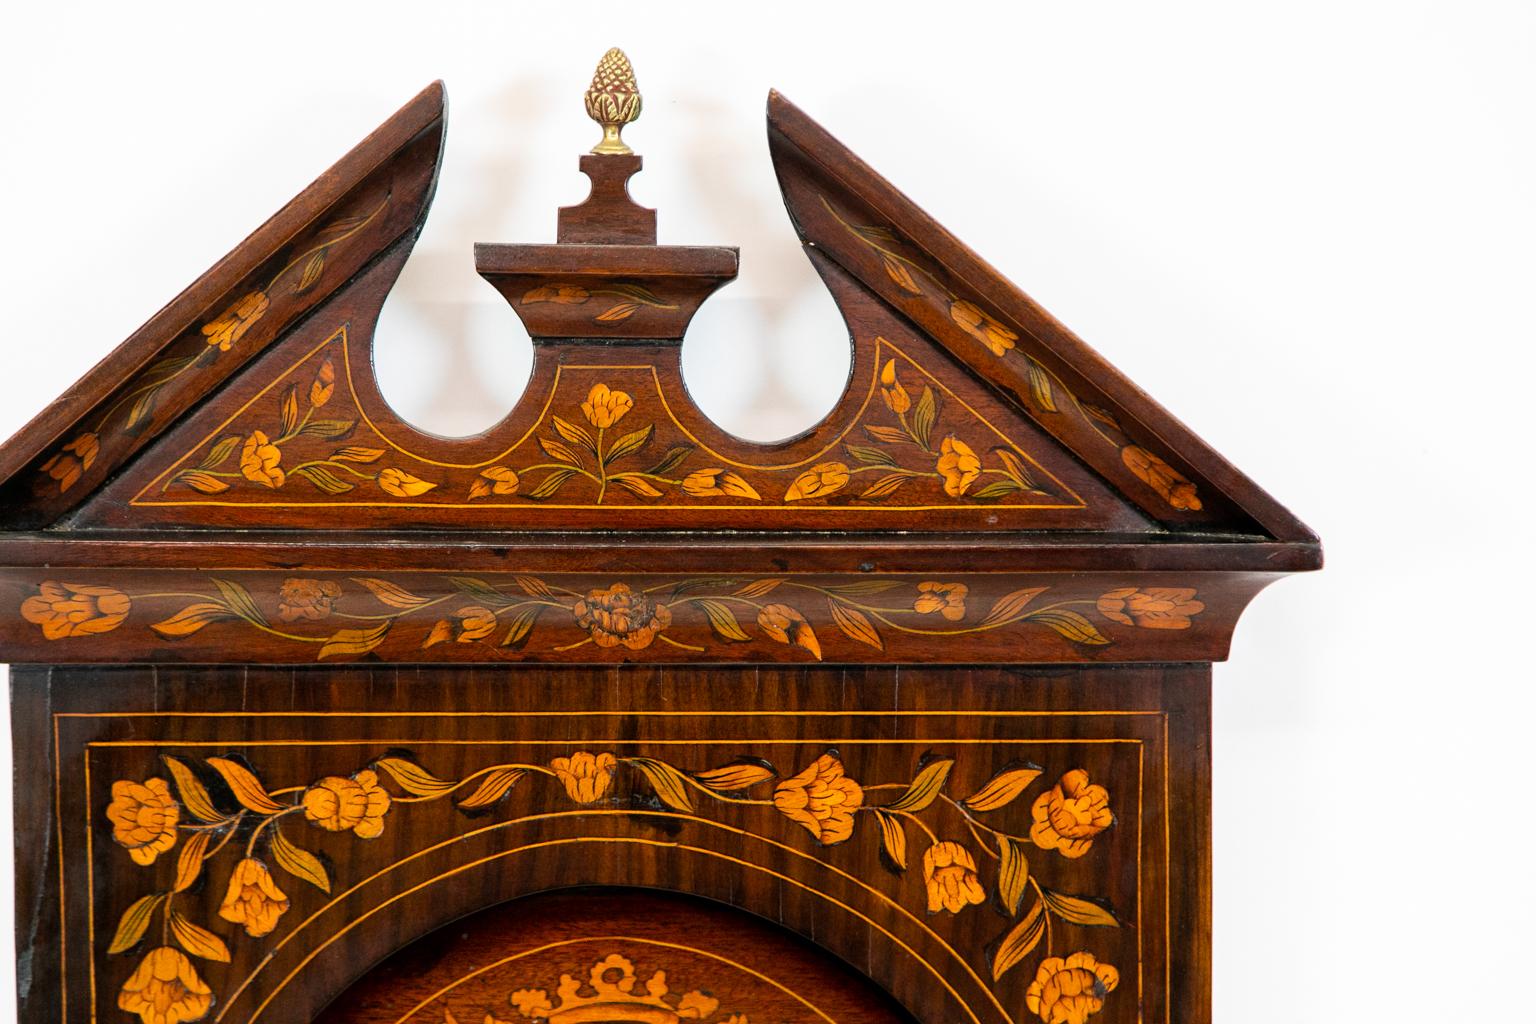 18th century Dutch Marquetry mirror, inlaid with flowers and vines with heraldic crests. It has a broken arch pediment with a brass pineapple finial.  The mirror is 4.75'' deep at the cornice,  34.25'' wide at the cornice, 29.25 '' wide at the